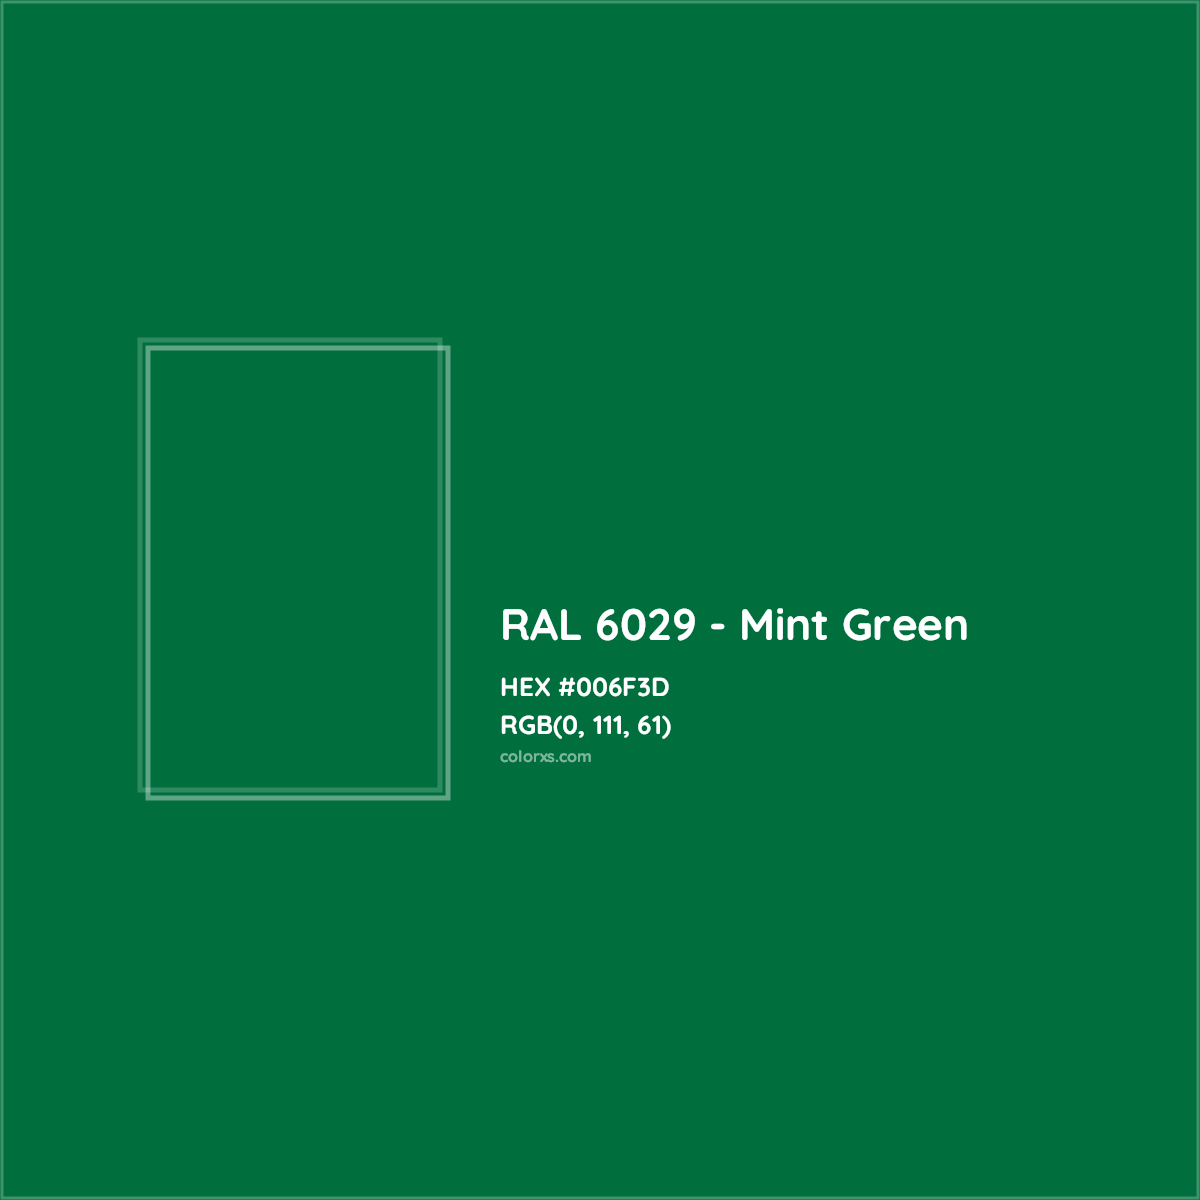 HEX #006F3D RAL 6029 - Mint Green CMS RAL Classic - Color Code